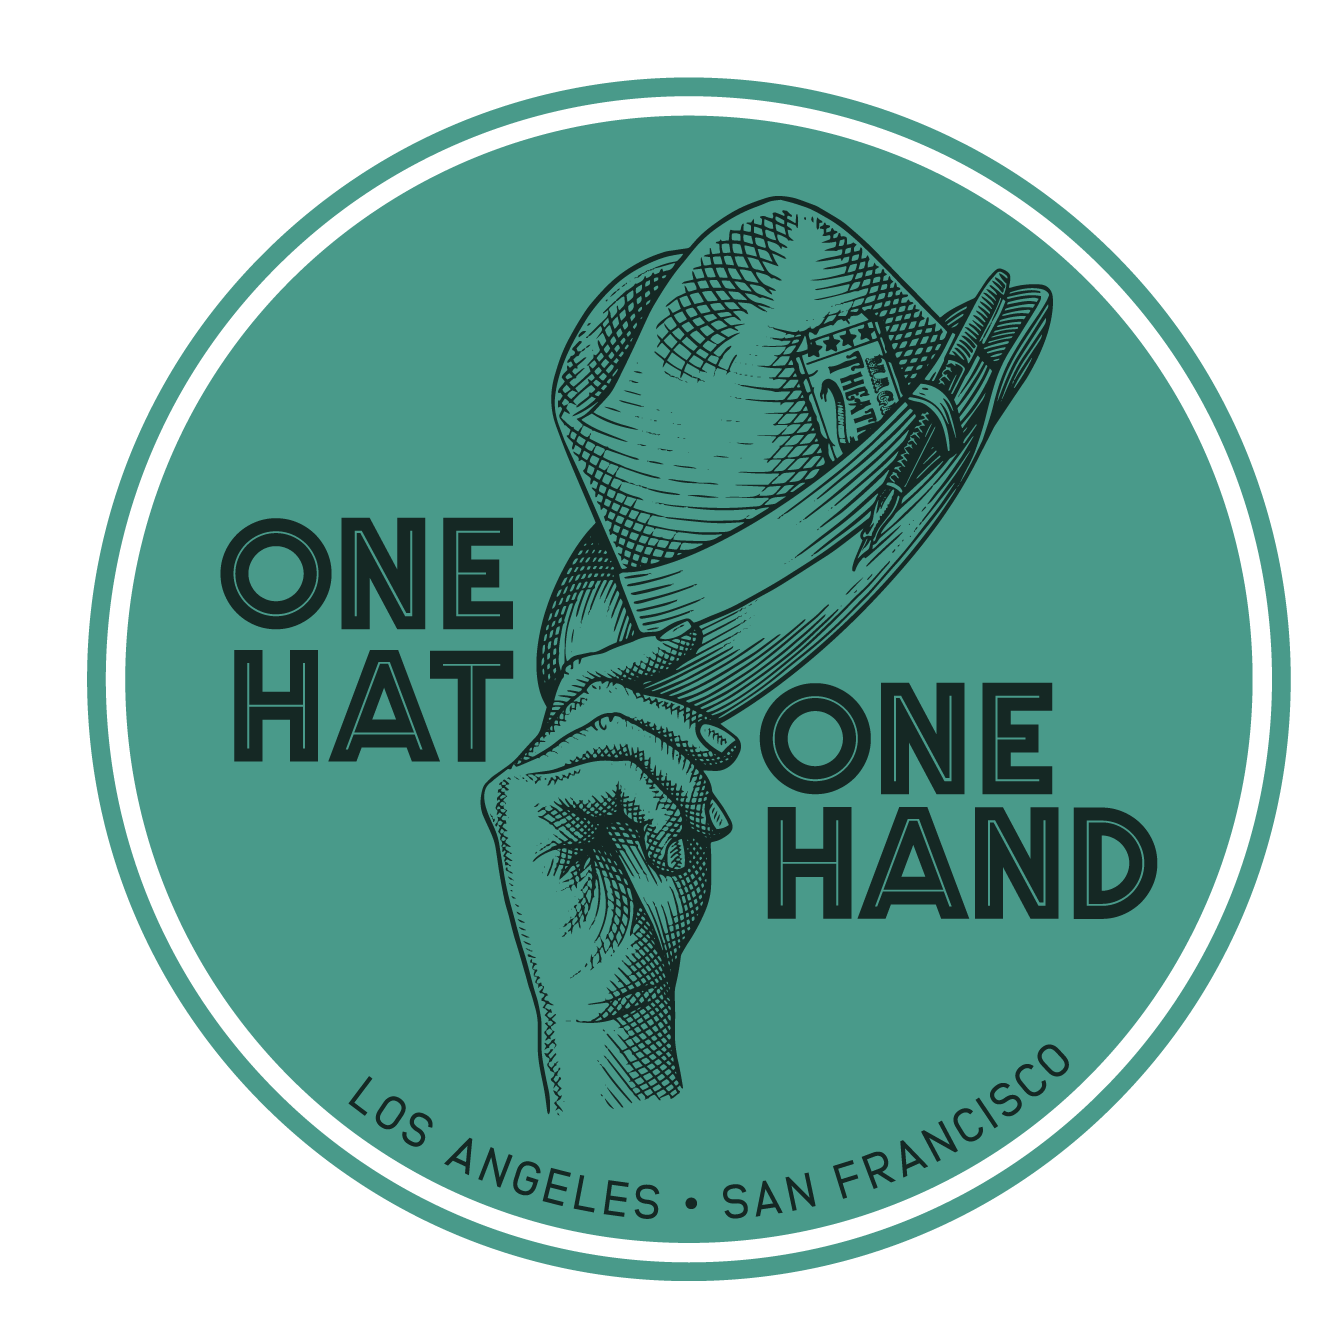 The round main logo for One Hat One Hand, showing a hand tipping a hat with a teal background.